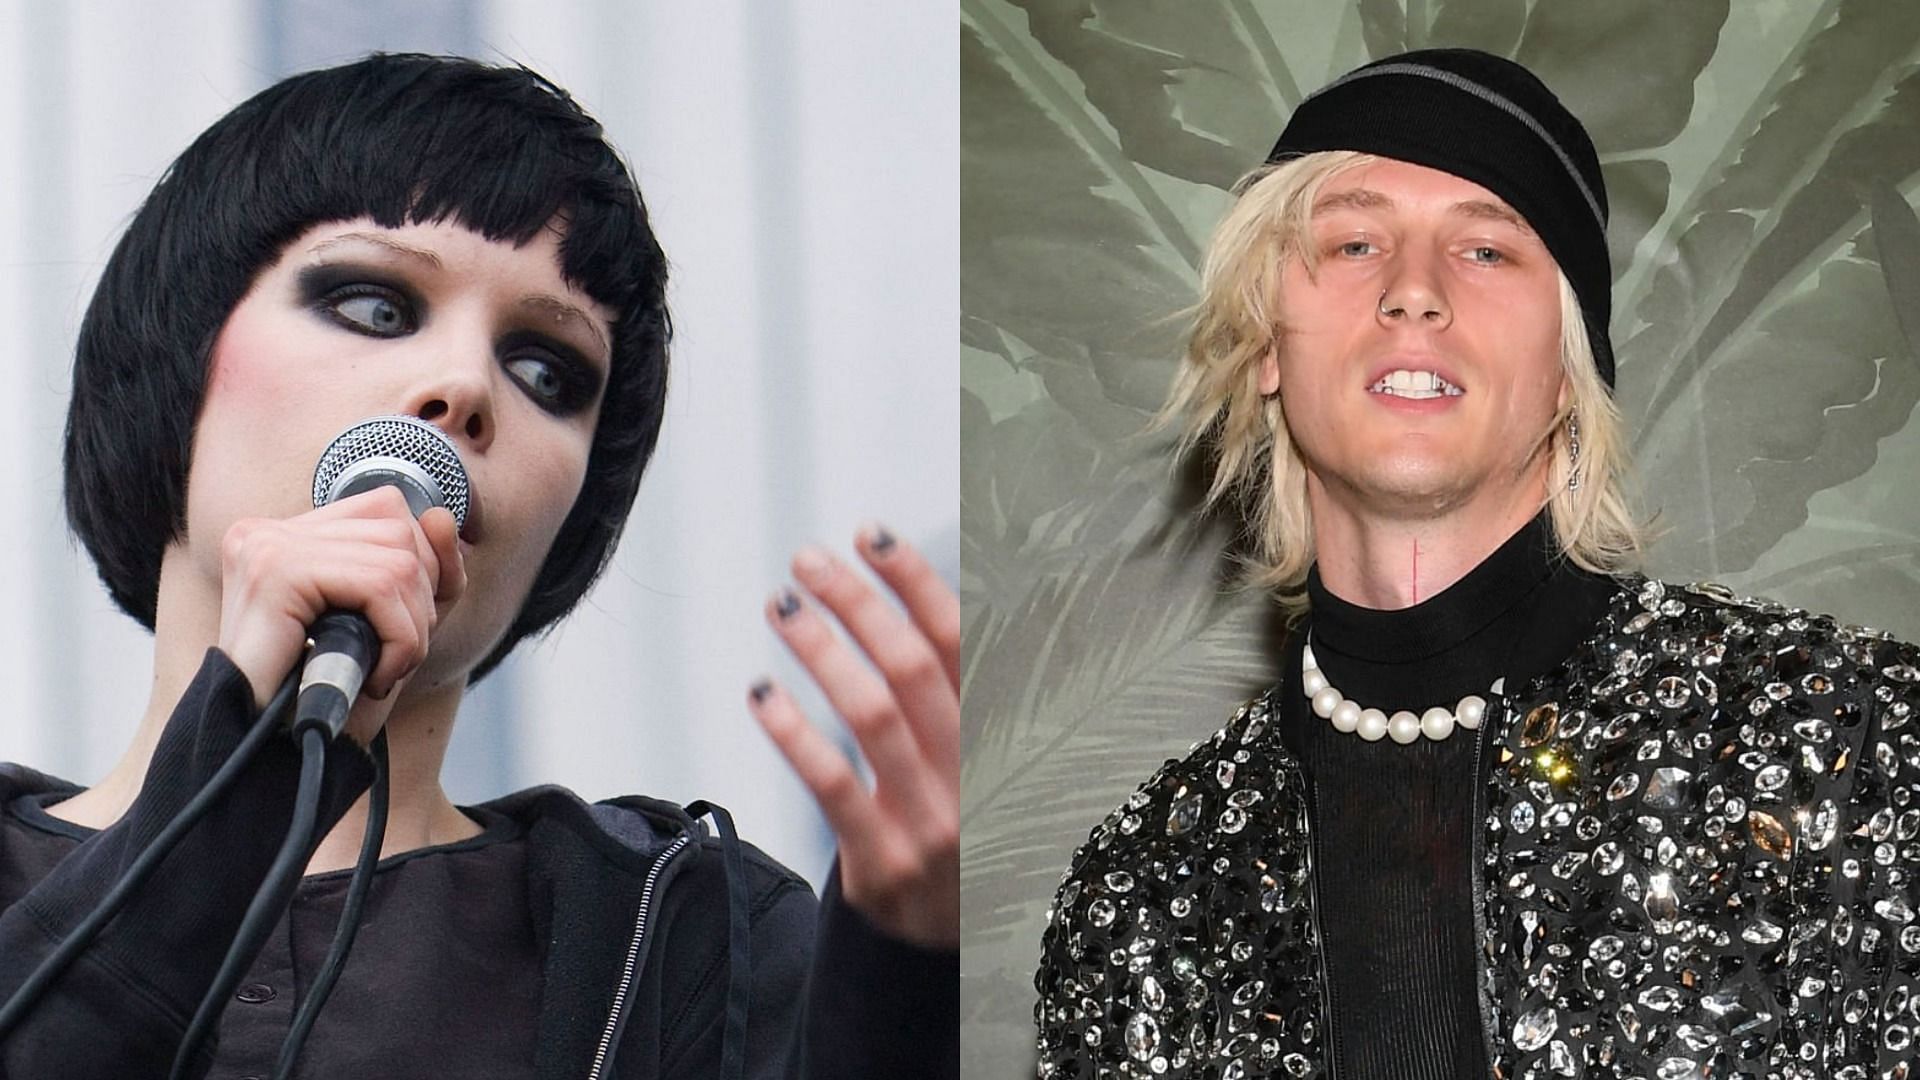 Alice Glass called out Machine Gun Kelly over past offensive comments about black women (Image via Scott Legato/Getty Images and Bryan Steffy/Getty Images)